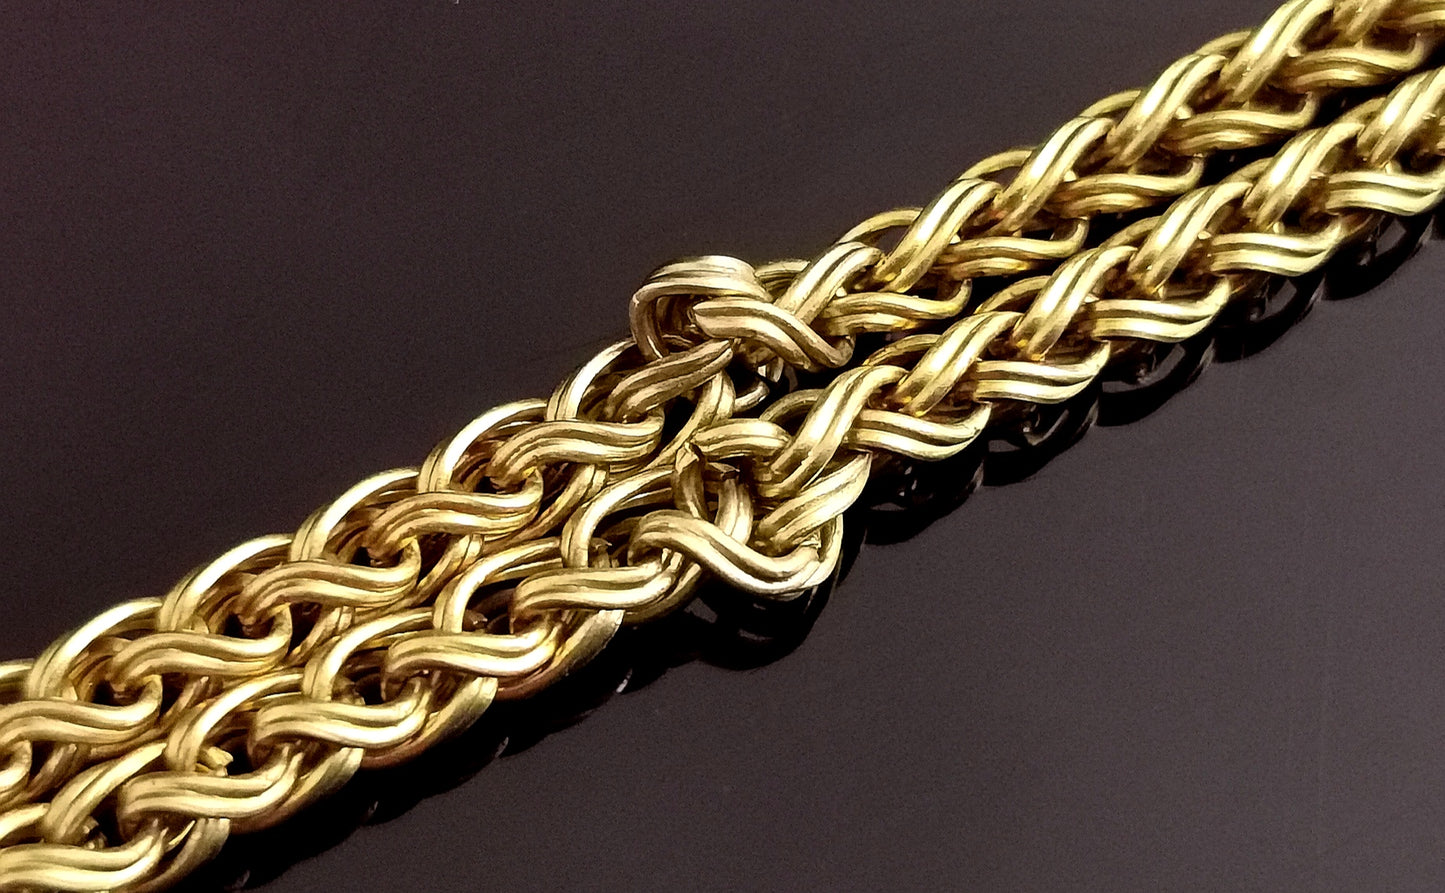 Antique Pinchbeck longuard chain necklace, muff chain necklace, Victorian